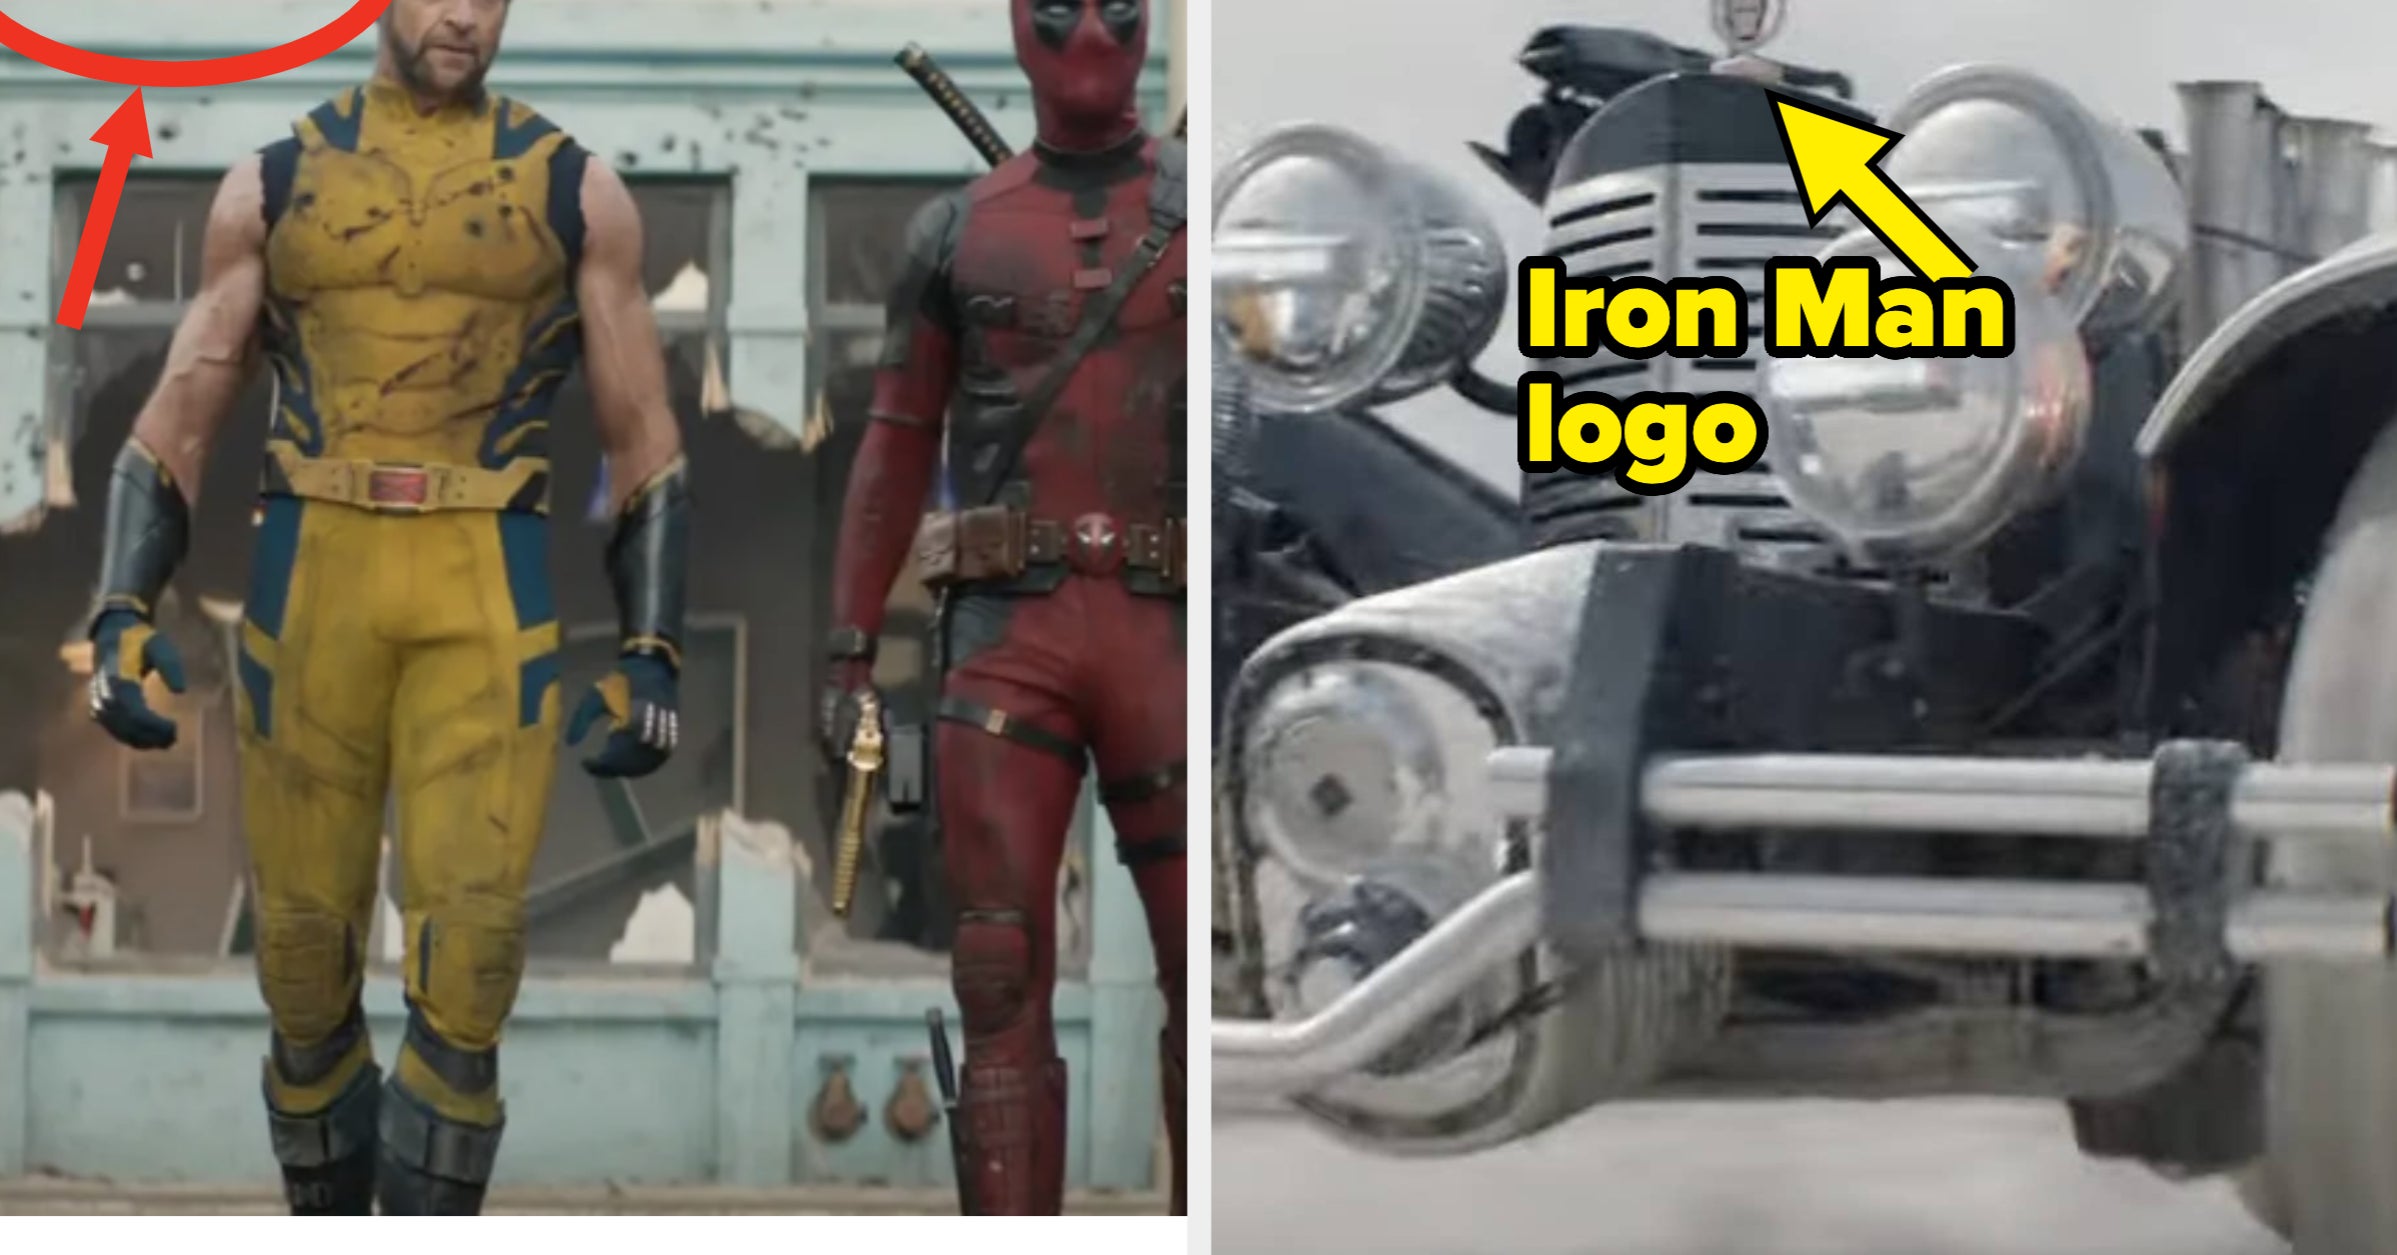 The "Deadpool & Wolverine" Trailer Has Finally Arrived, And Here Are All The Tasty Easter Eggs